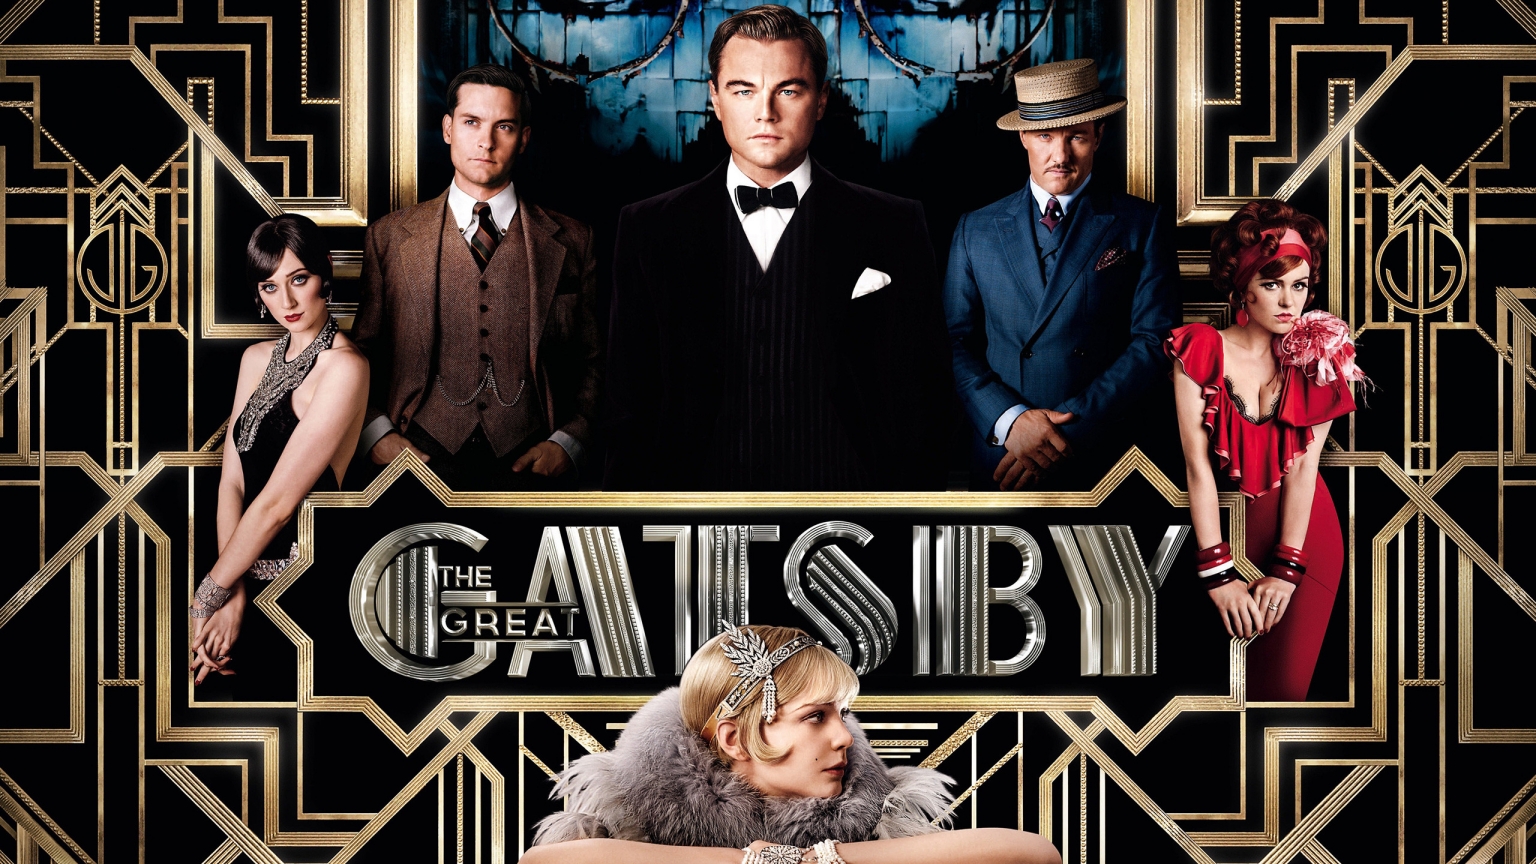 The Great Gatsby Movie for 1536 x 864 HDTV resolution